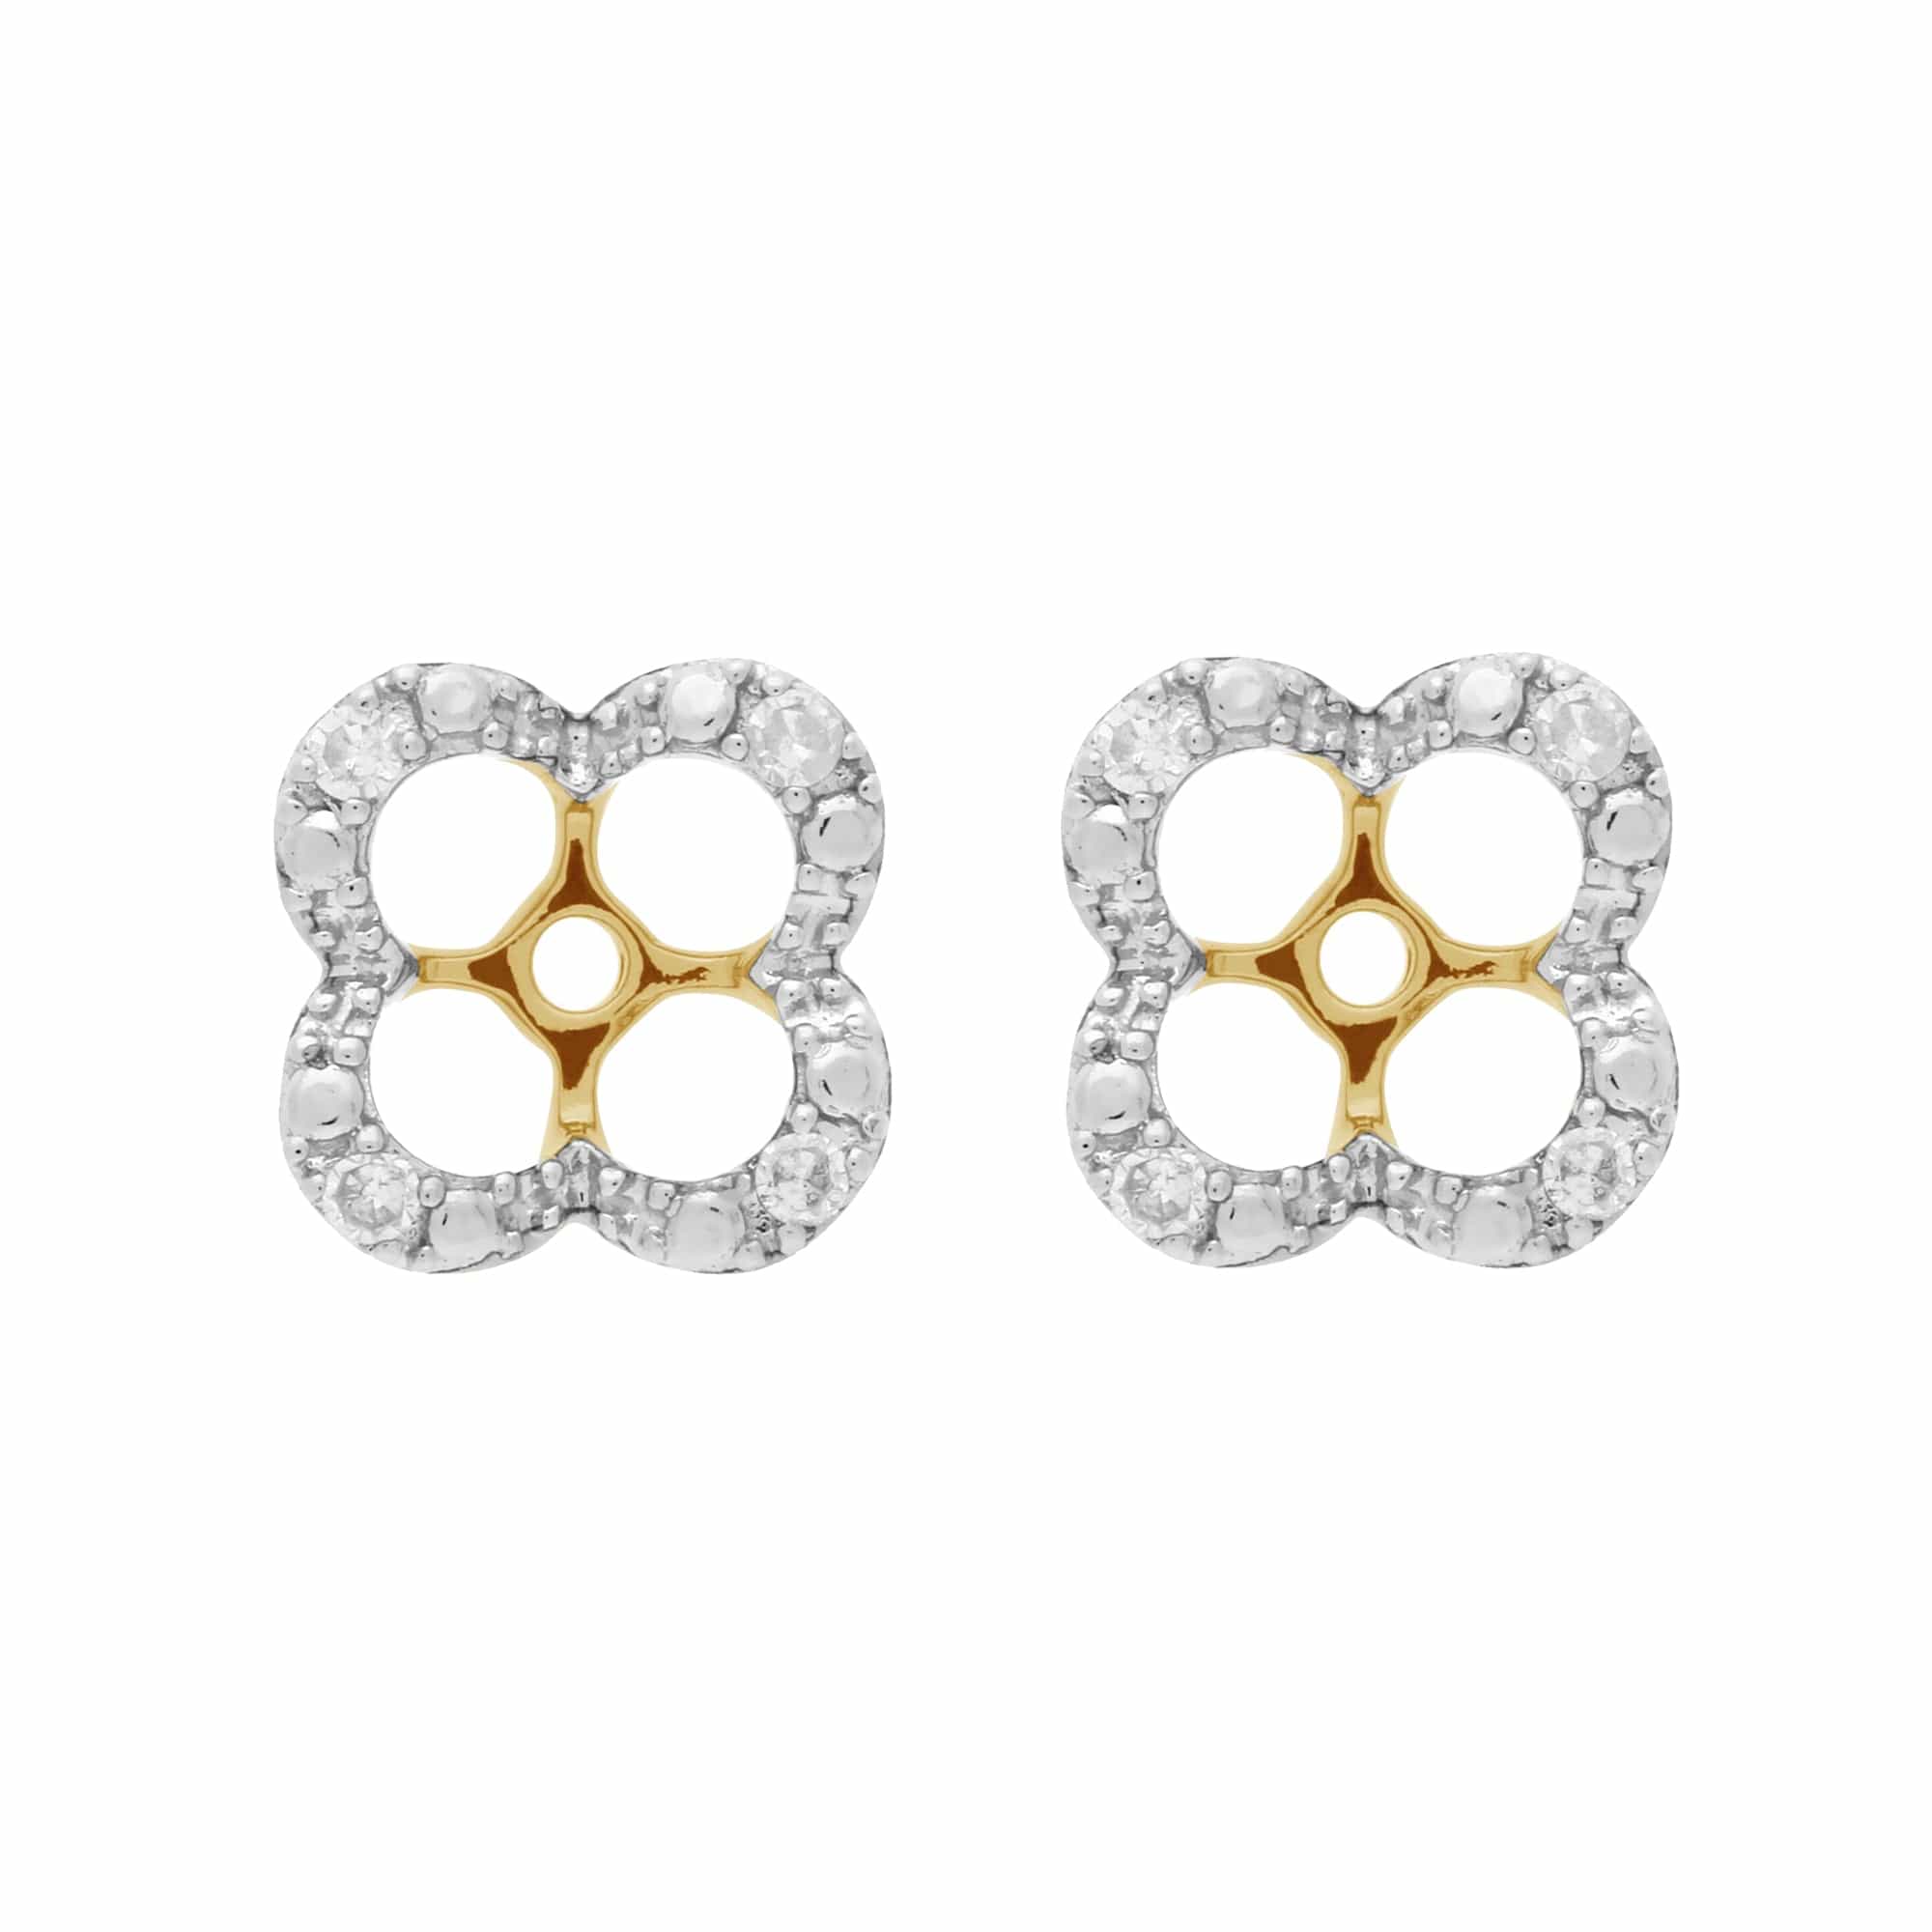 Classic Round Blue Sapphire Studs with Detachable Diamond Floral Ear Jacket in 9ct Yellow Gold - Gemondo